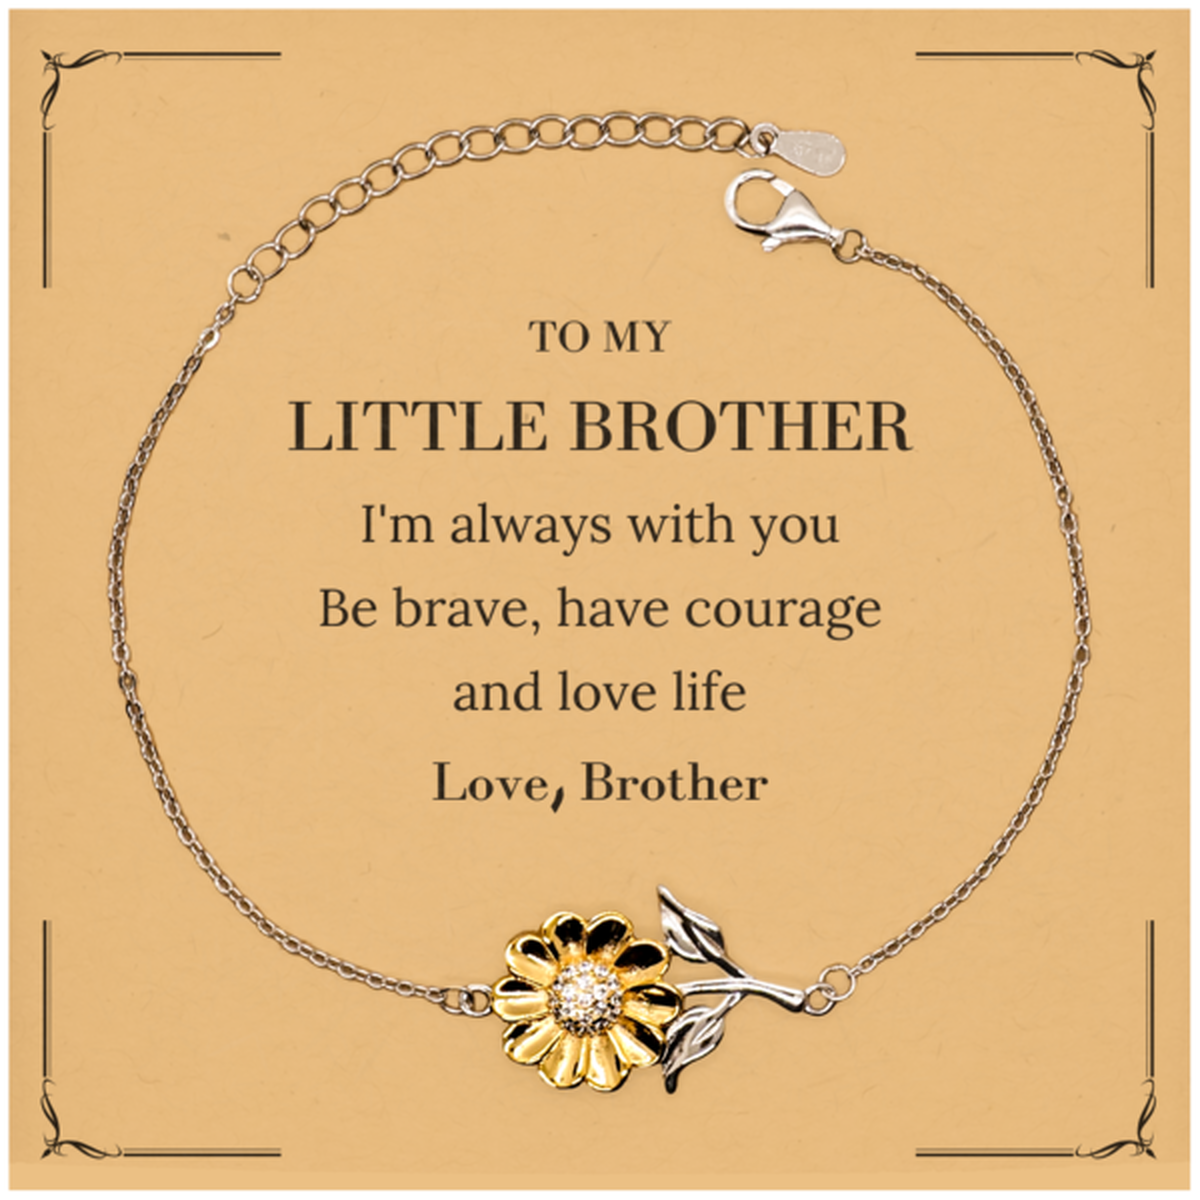 To My Little Brother Gifts from Brother, Unique Sunflower Bracelet Inspirational Christmas Birthday Graduation Gifts for Little Brother I'm always with you. Be brave, have courage and love life. Love, Brother